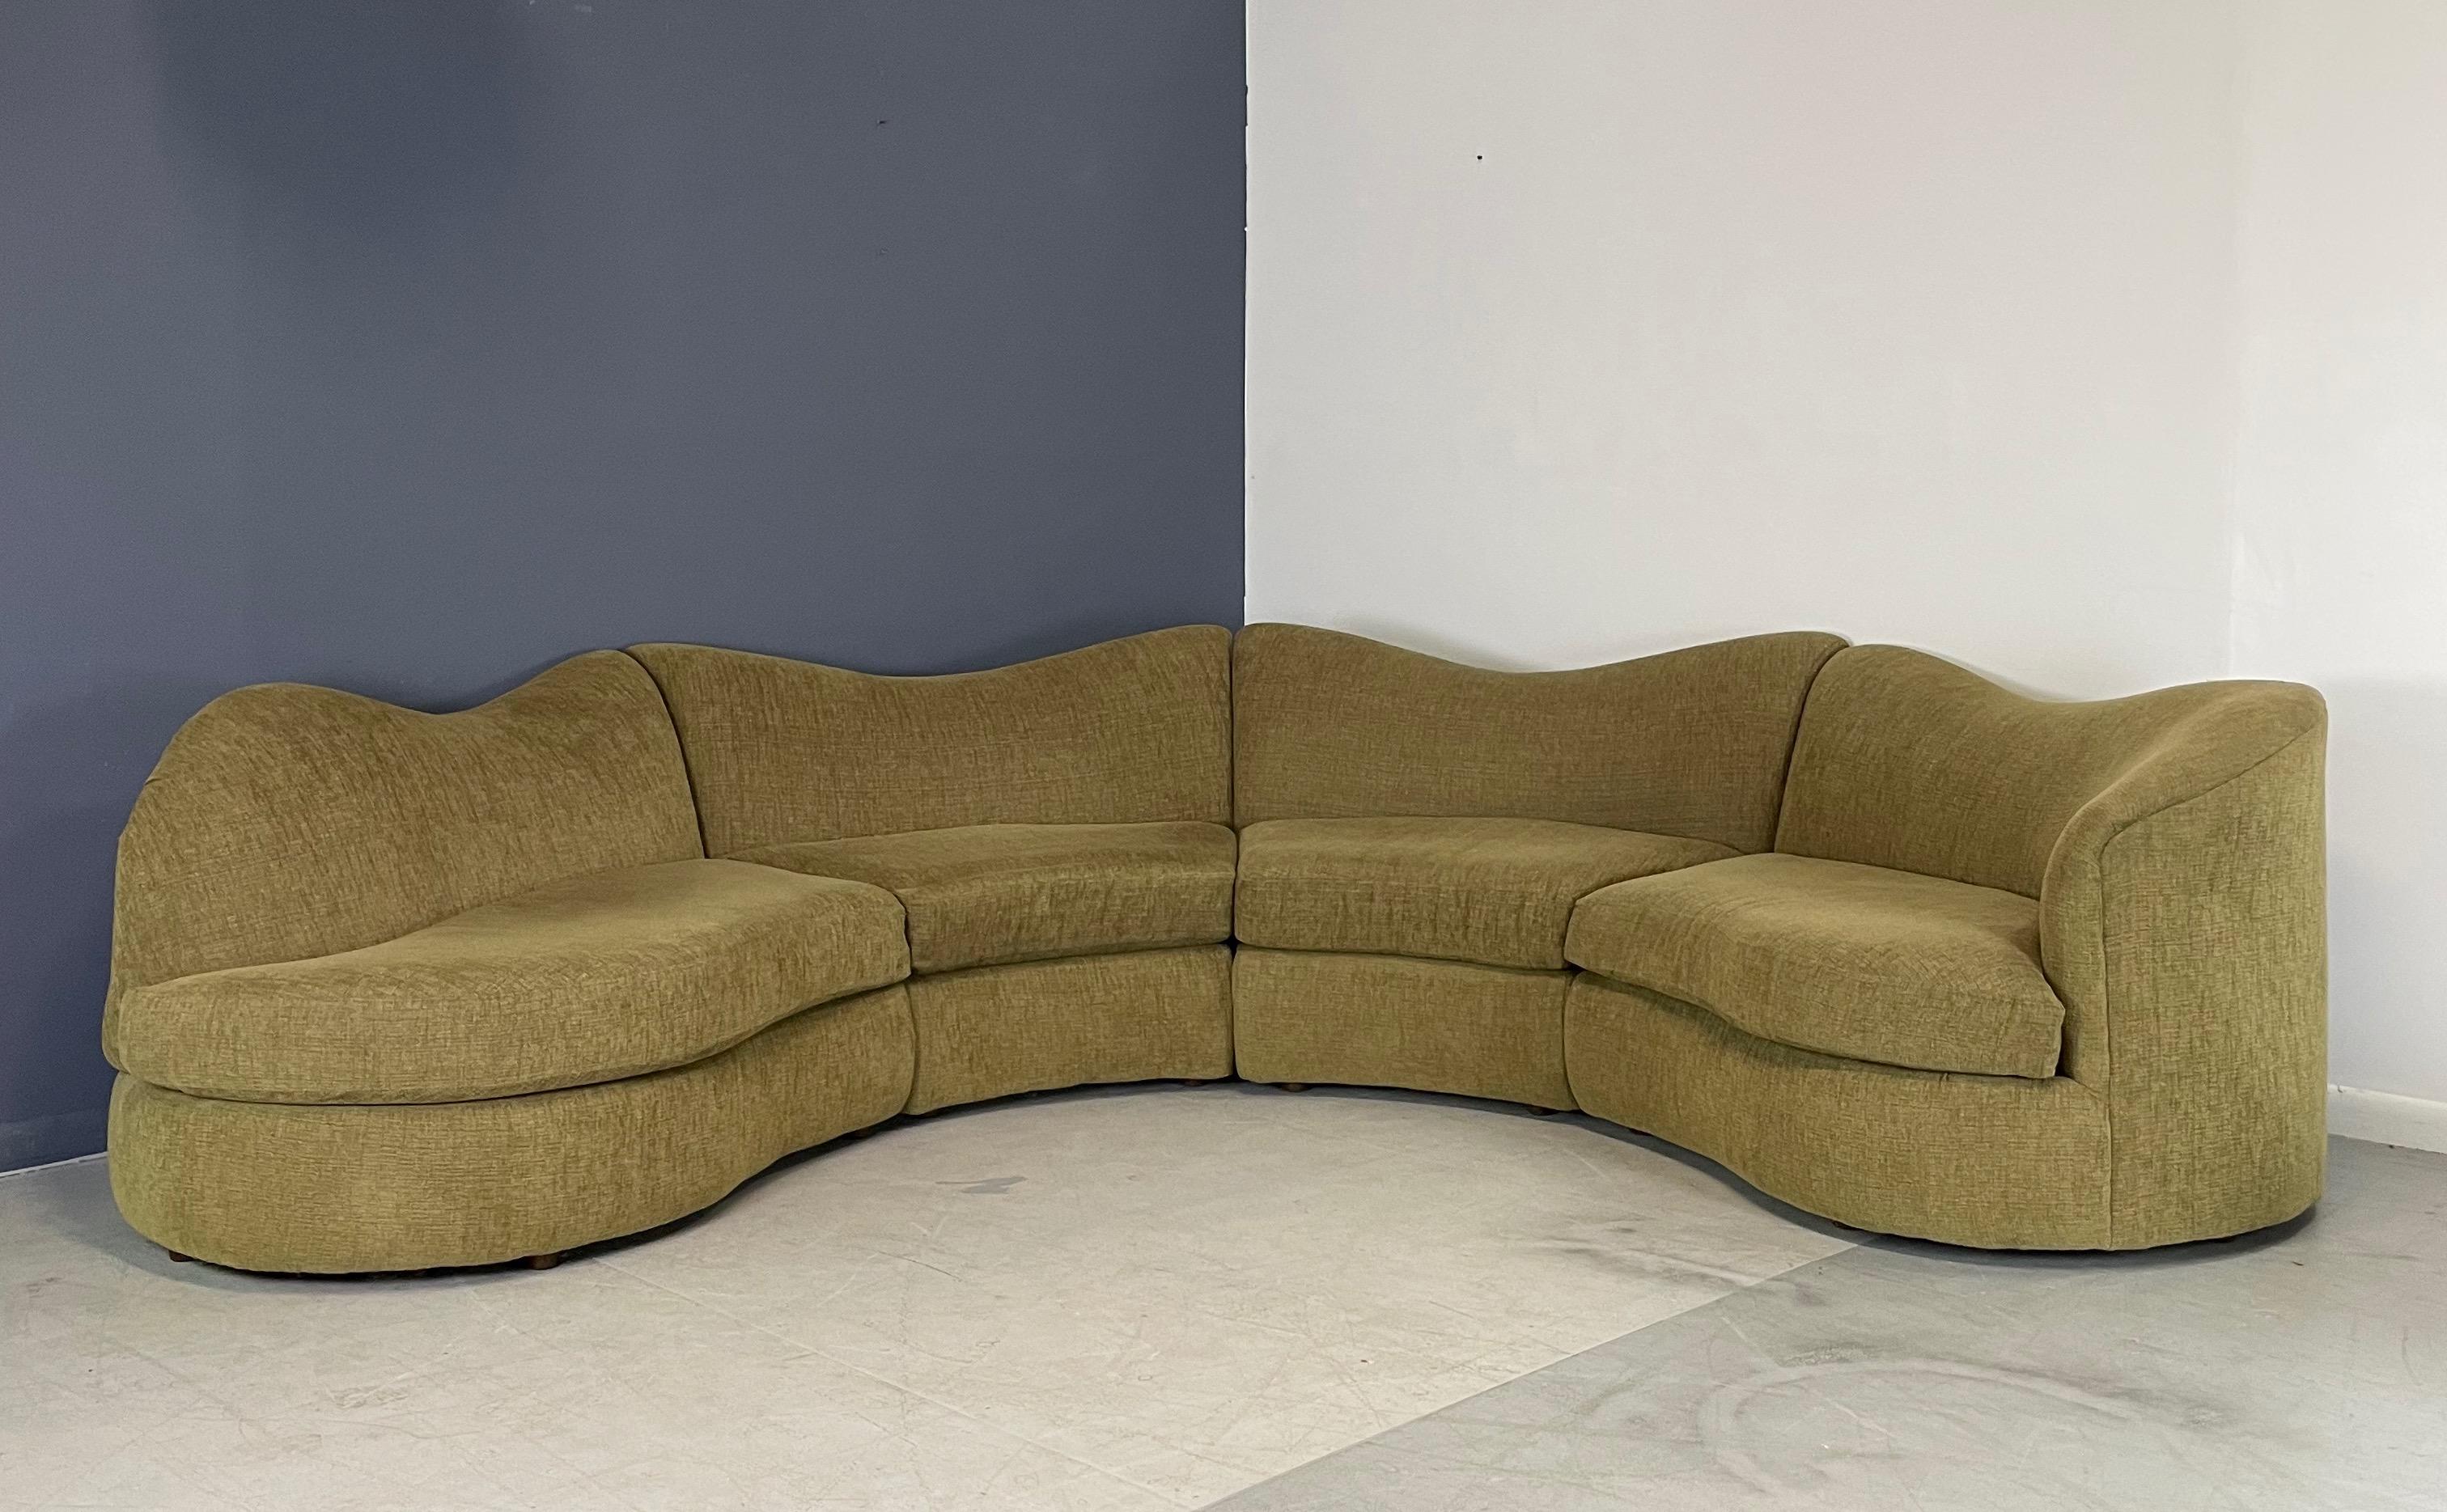 Upholstery Post Modern Undulating Four Section Curved Semi Circular Sectional Sofa